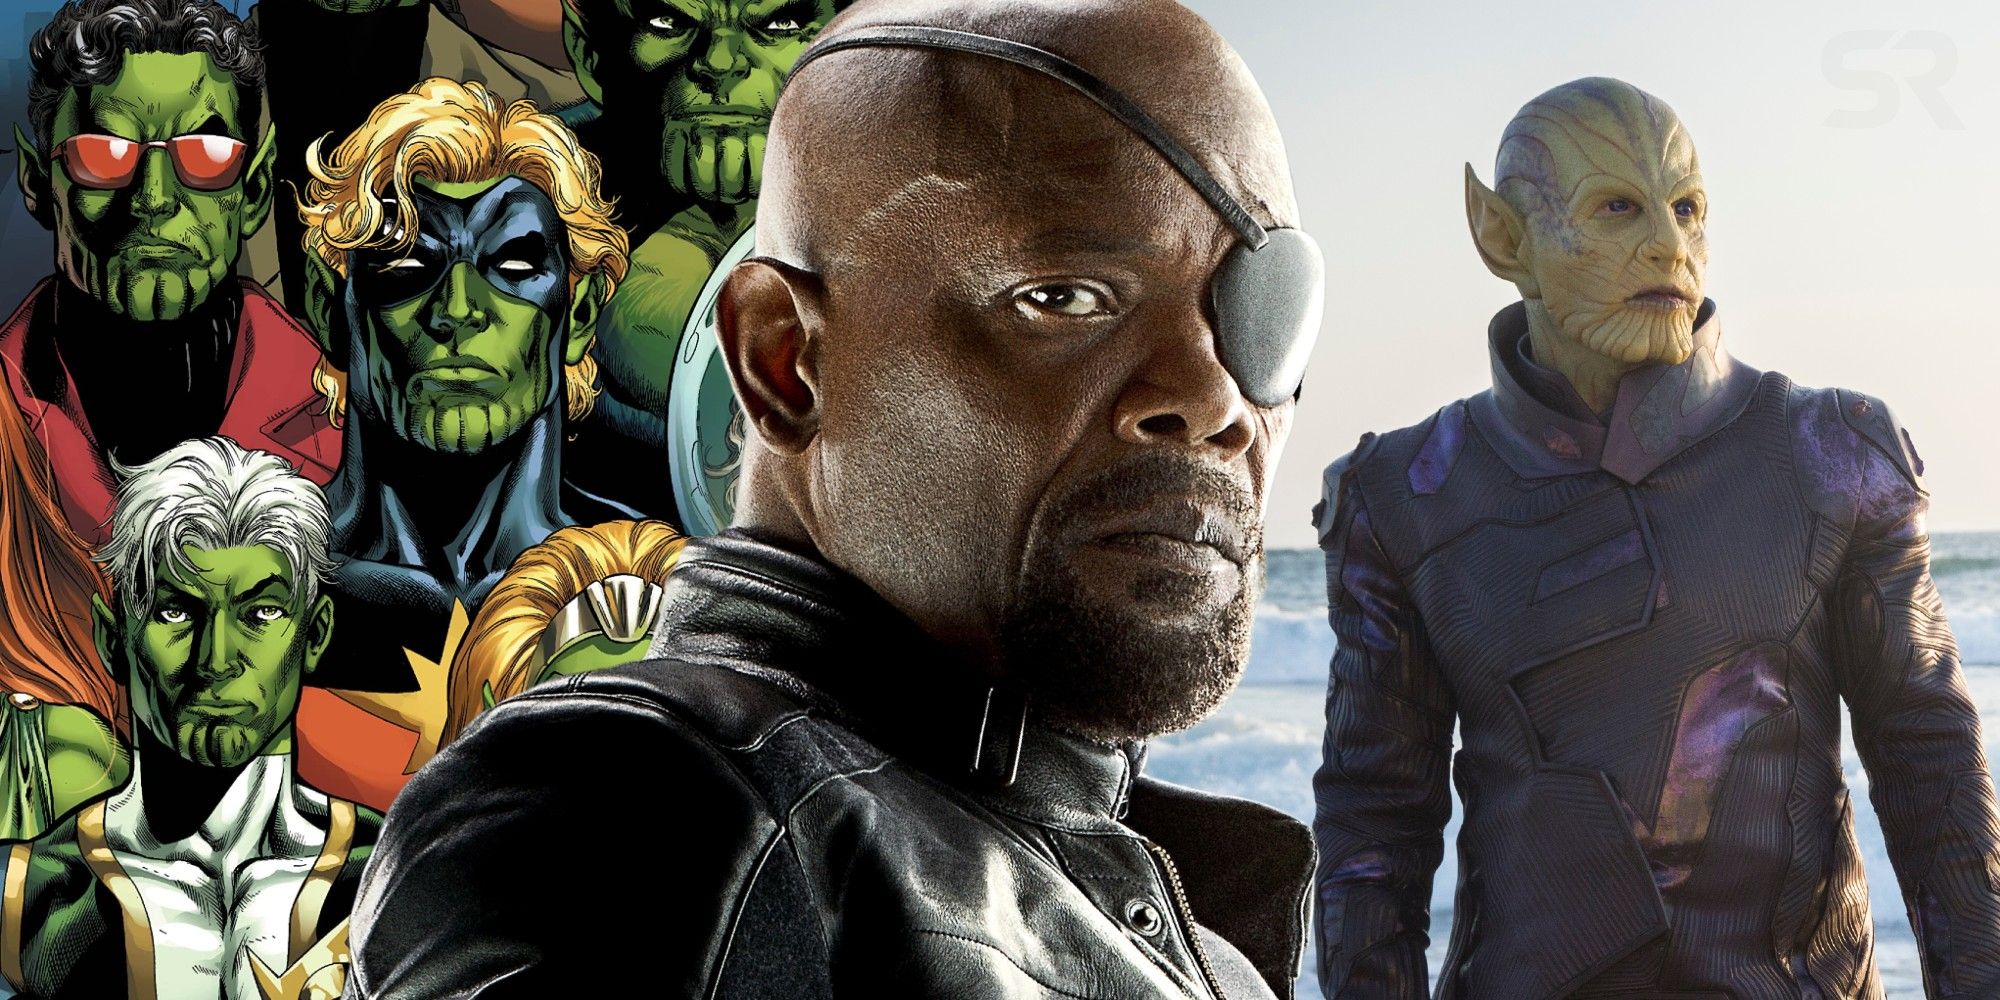 Nick Fury and a bunch of Skrulls